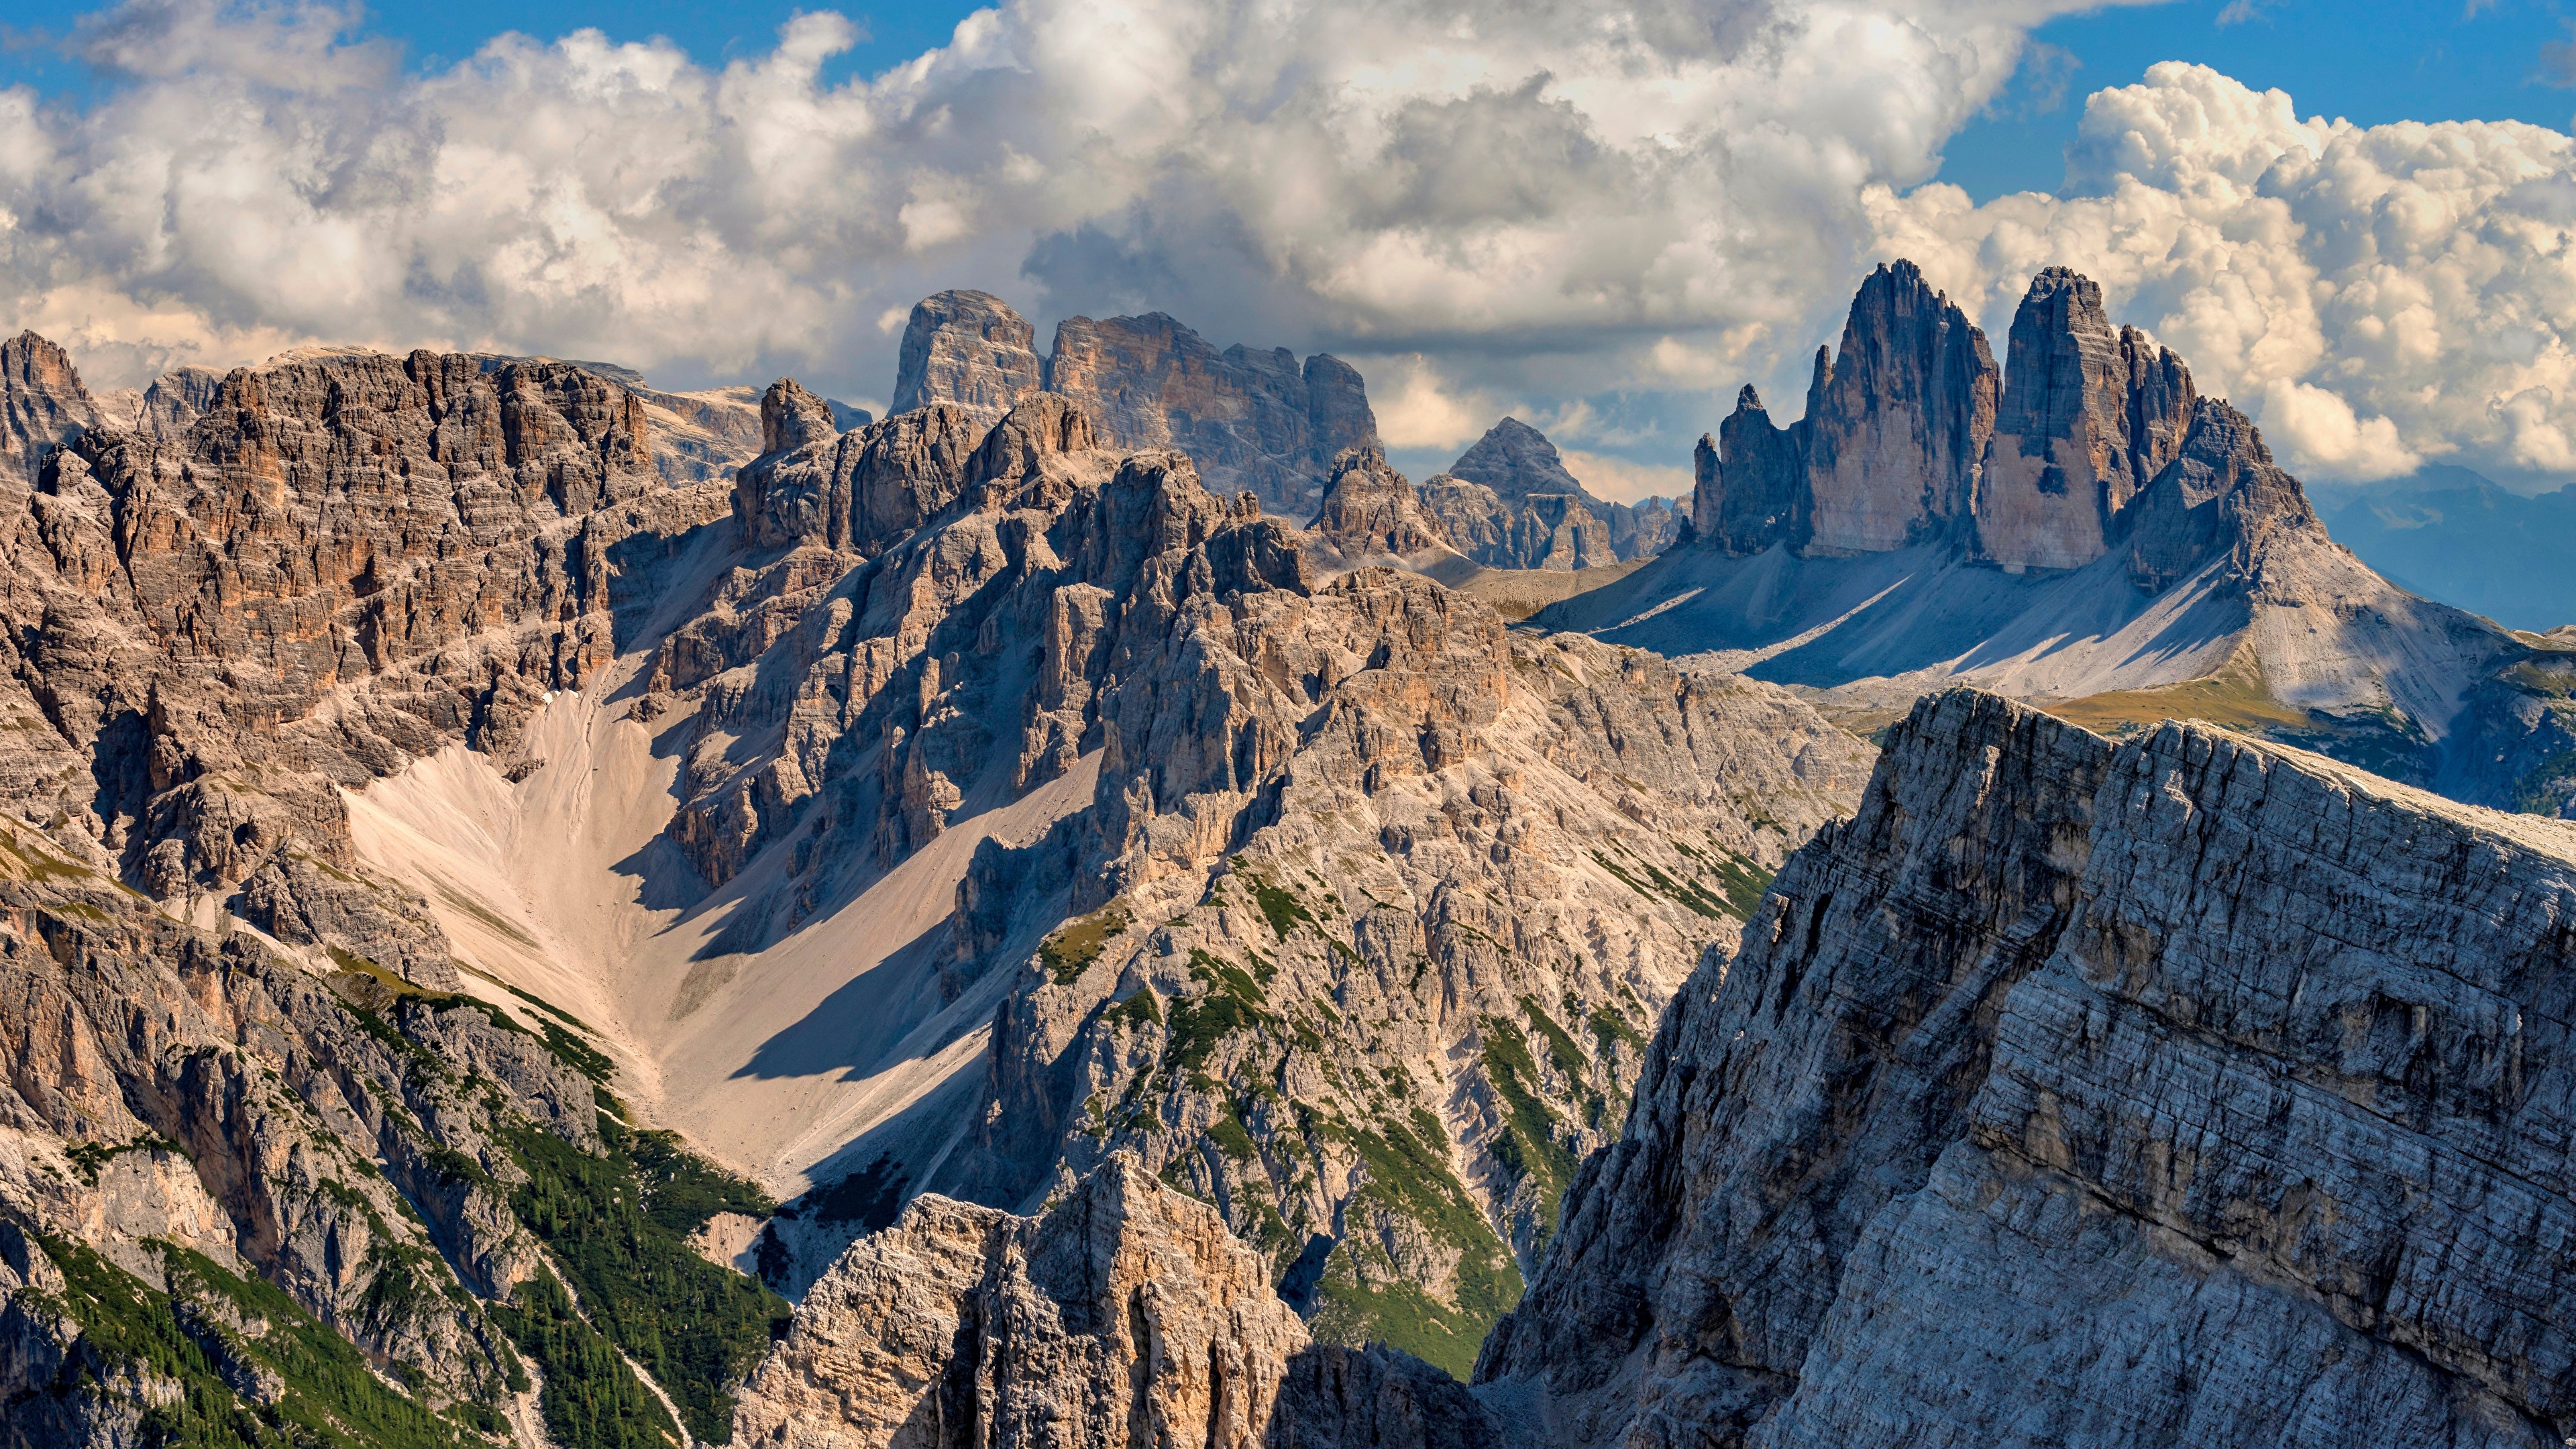 General 3840x2160 Italy Dolomites Alps nature sky mountains clouds photography Three Peaks of Lavaredo